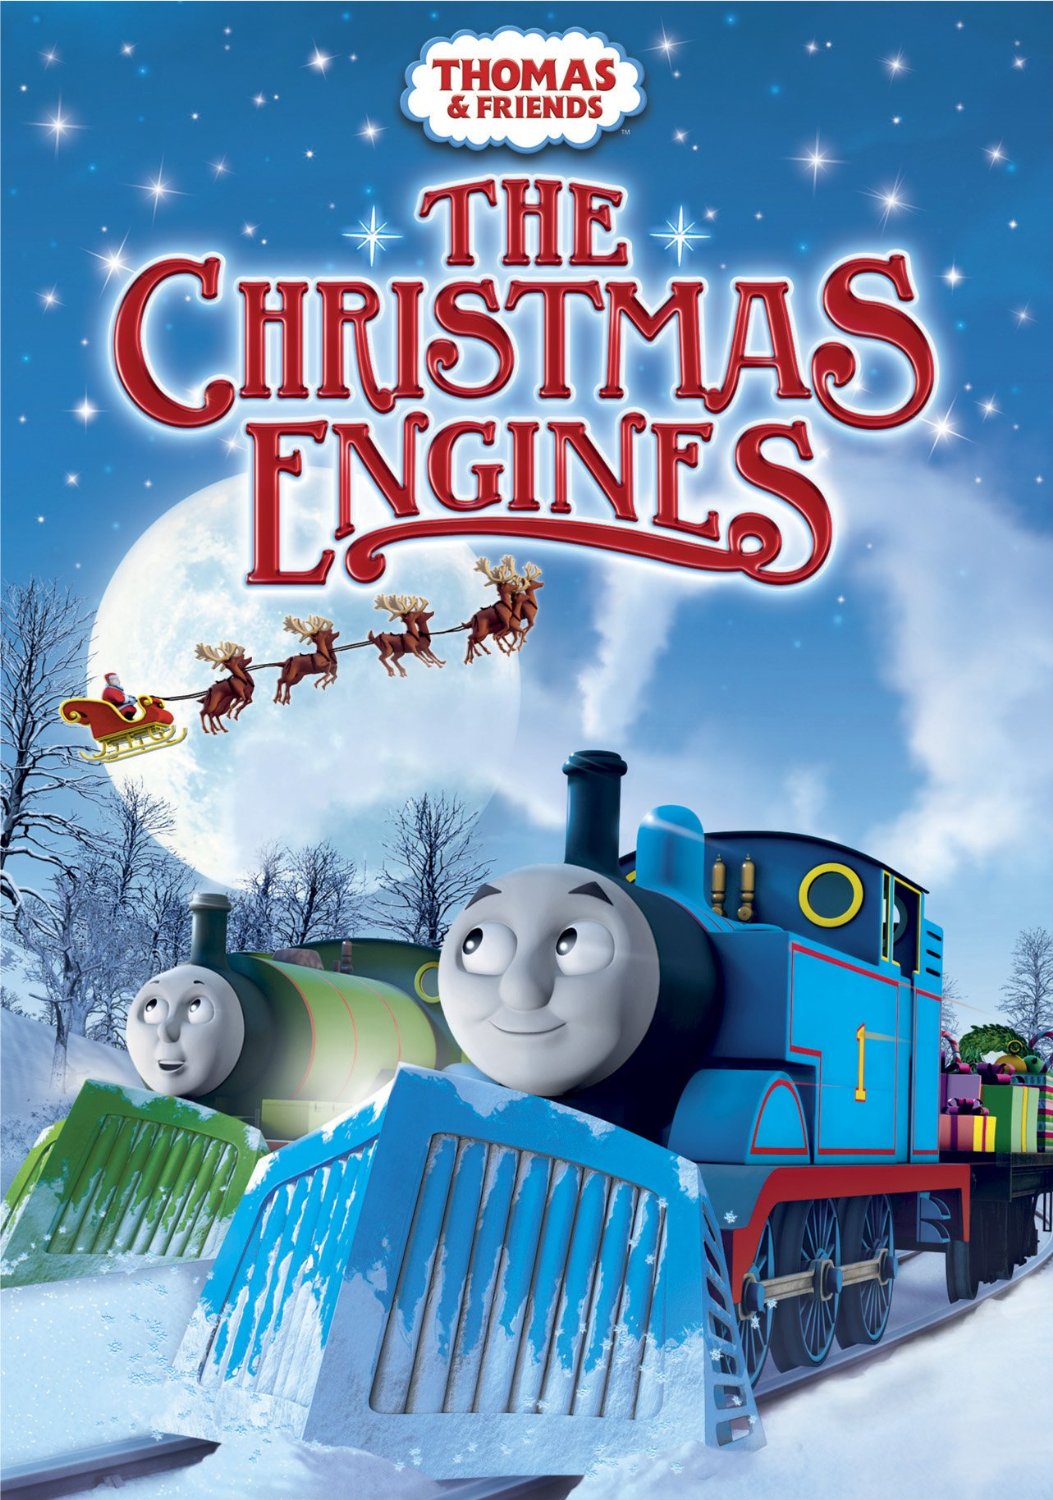 Thomas & Friends: The Christmas Engines Only $6.99 – 53% Savings!!